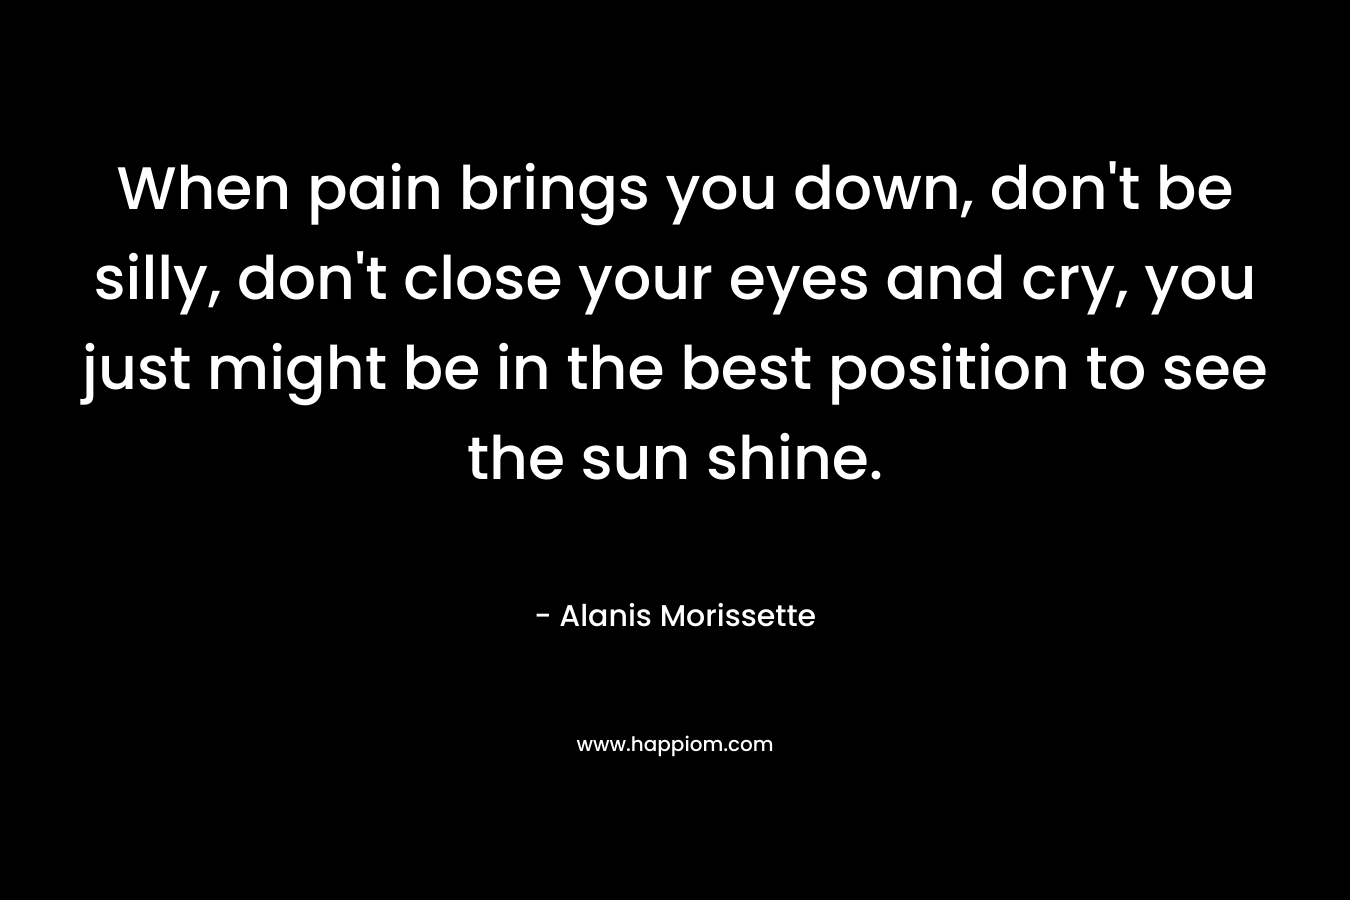 When pain brings you down, don’t be silly, don’t close your eyes and cry, you just might be in the best position to see the sun shine. – Alanis Morissette